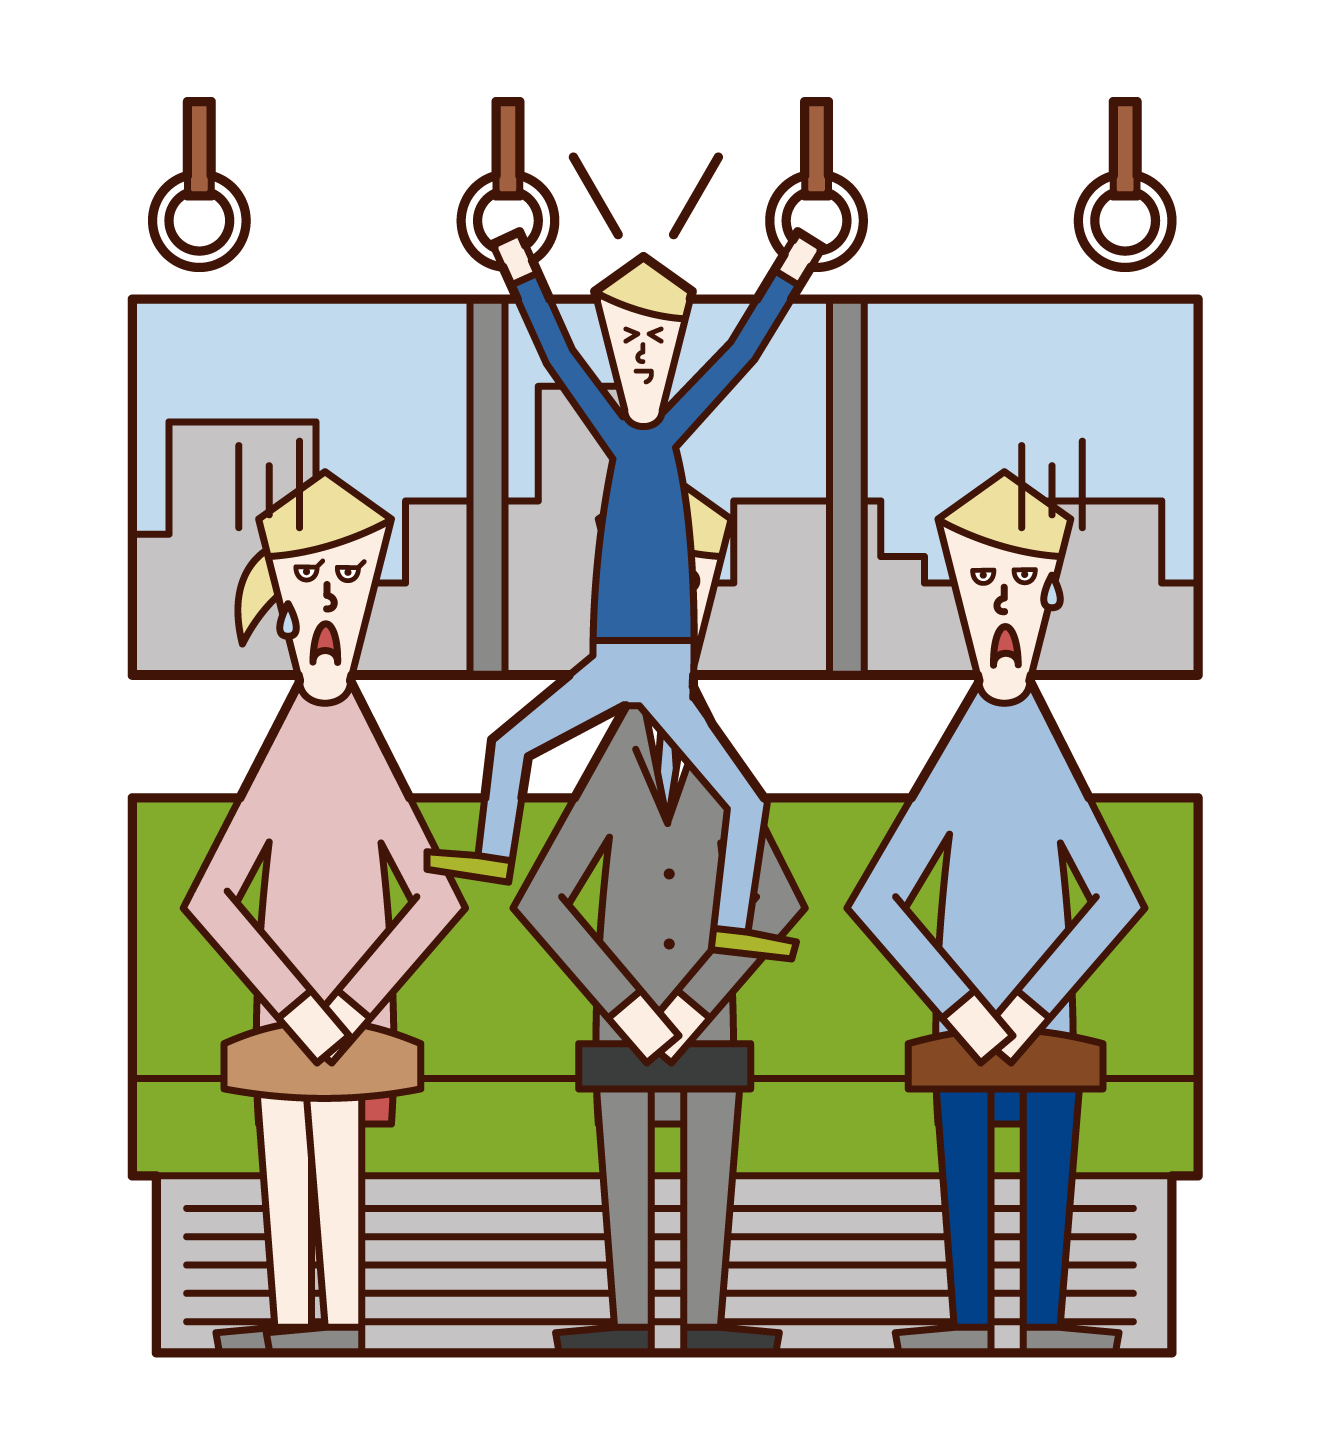 Illustration of a child (boy) hanging on a hanging leather on a train